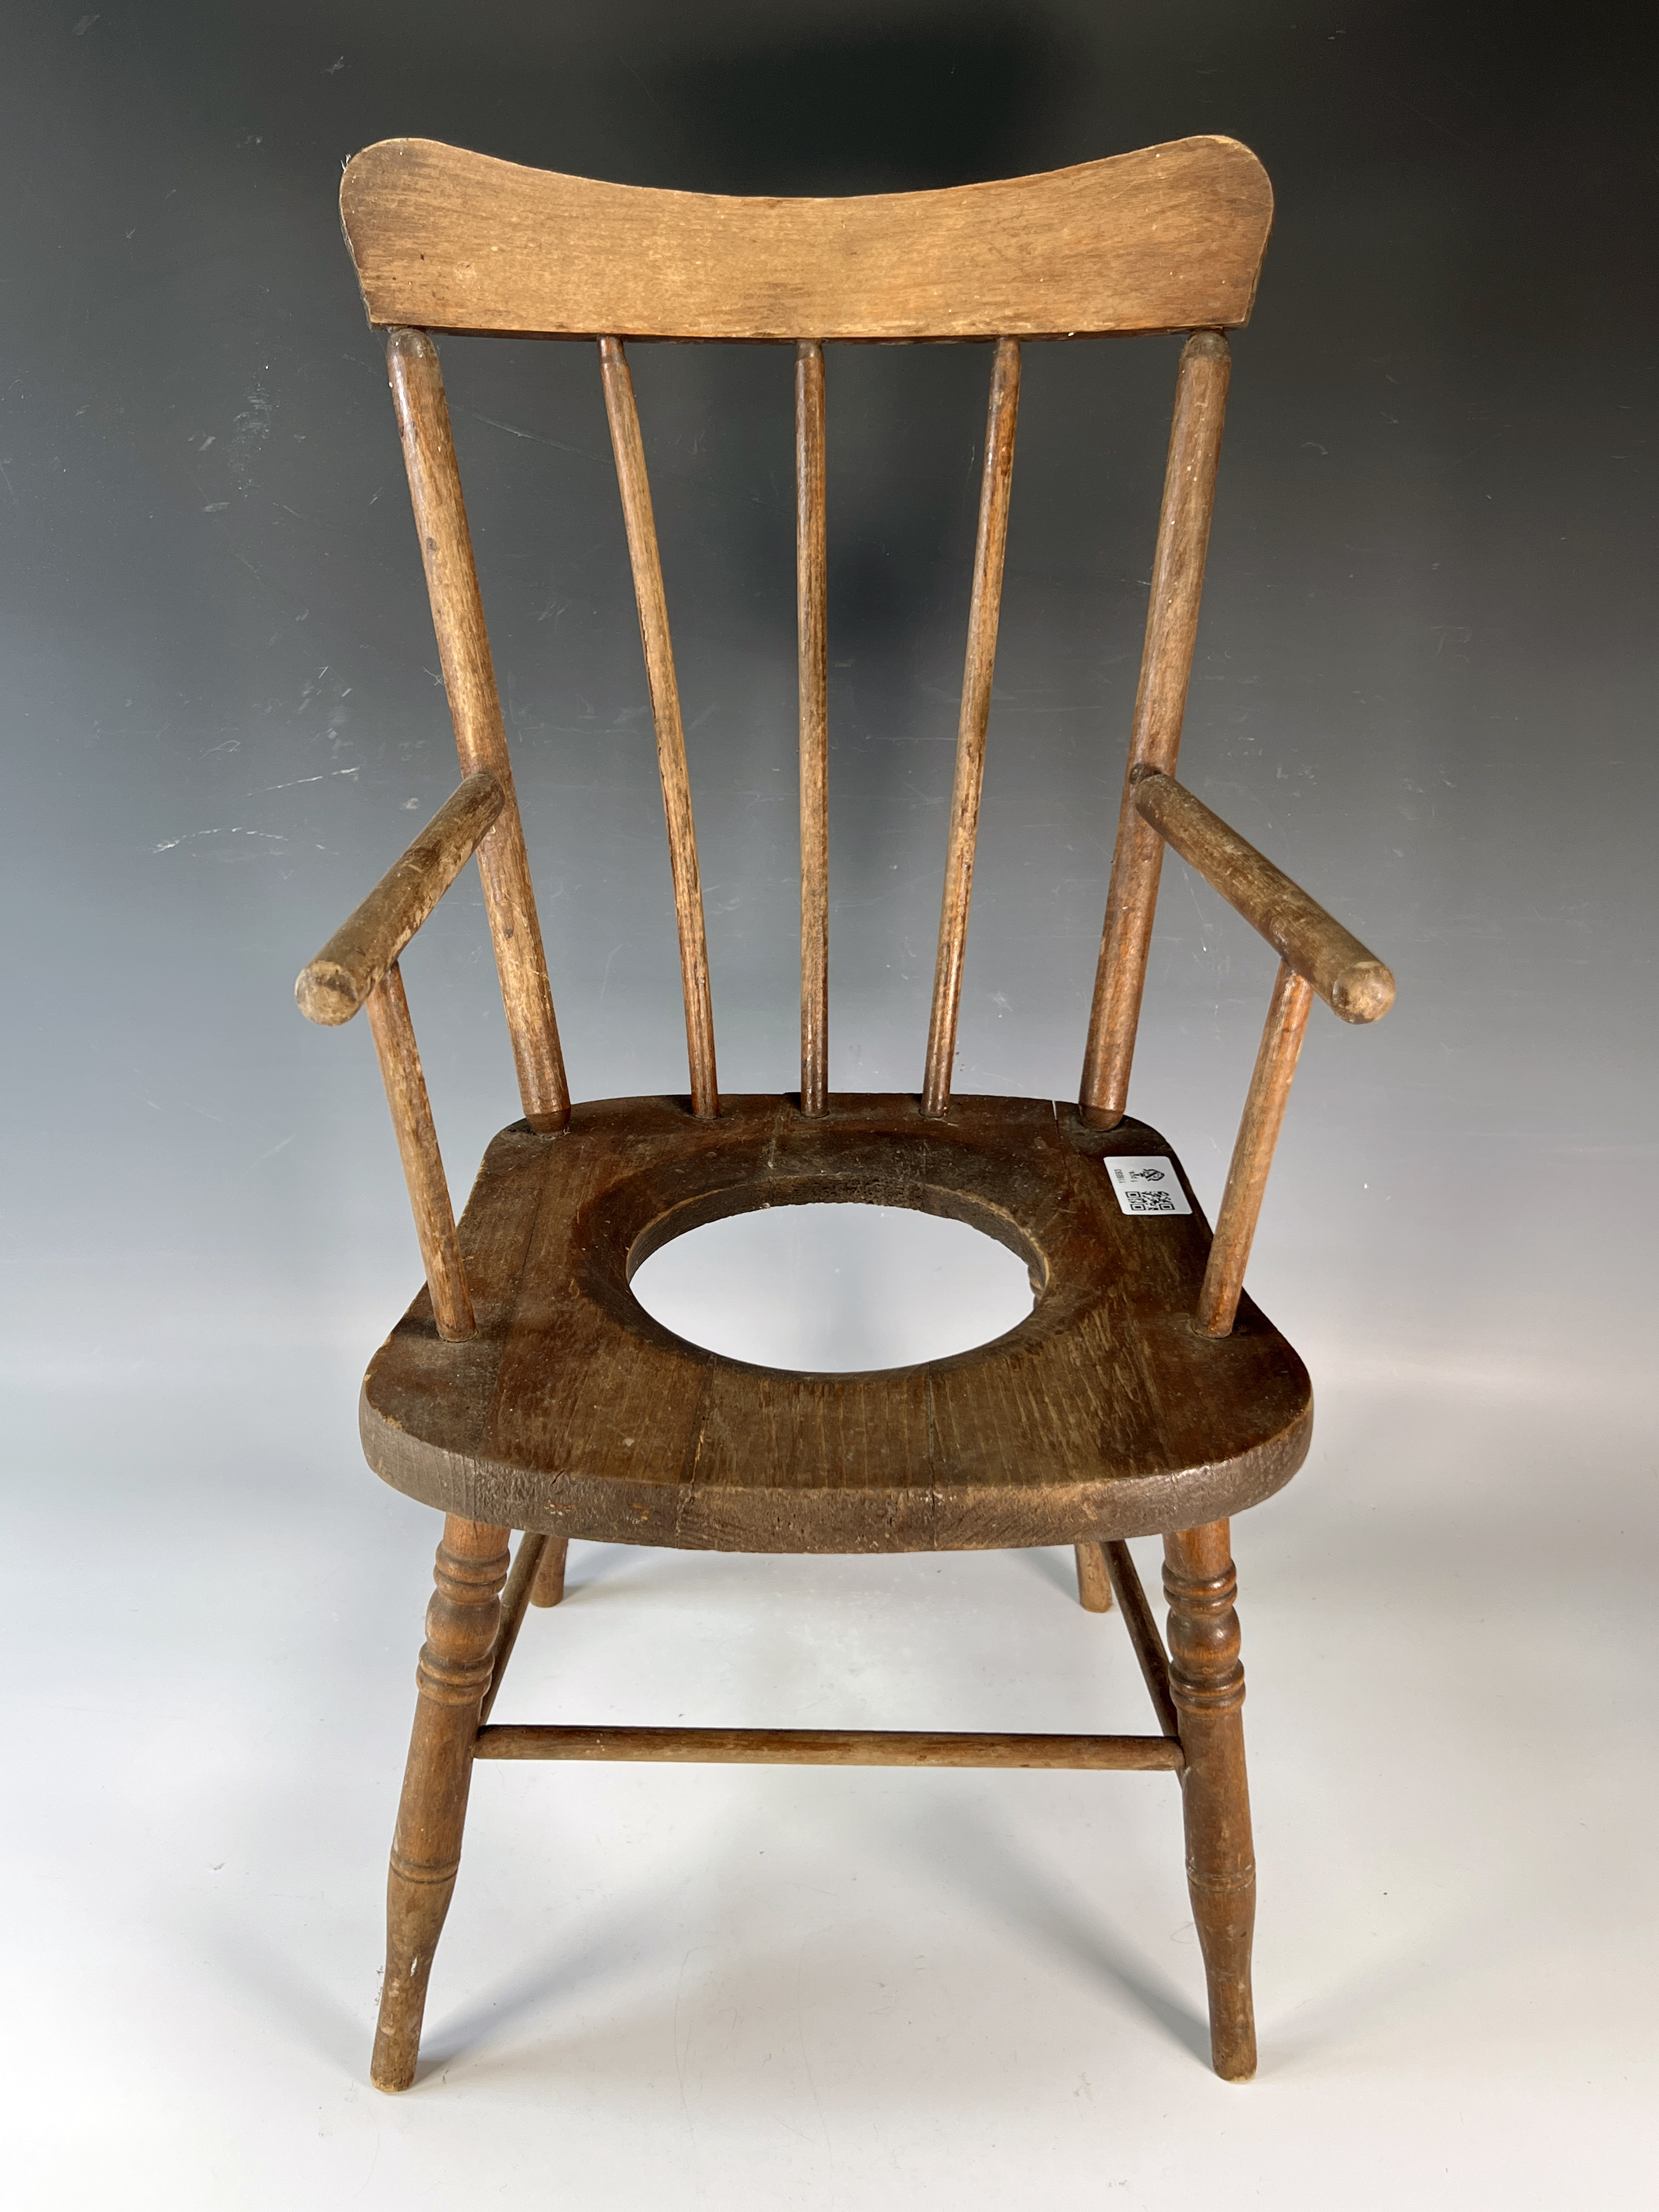 Vintage Wooden Potty Chair image 2